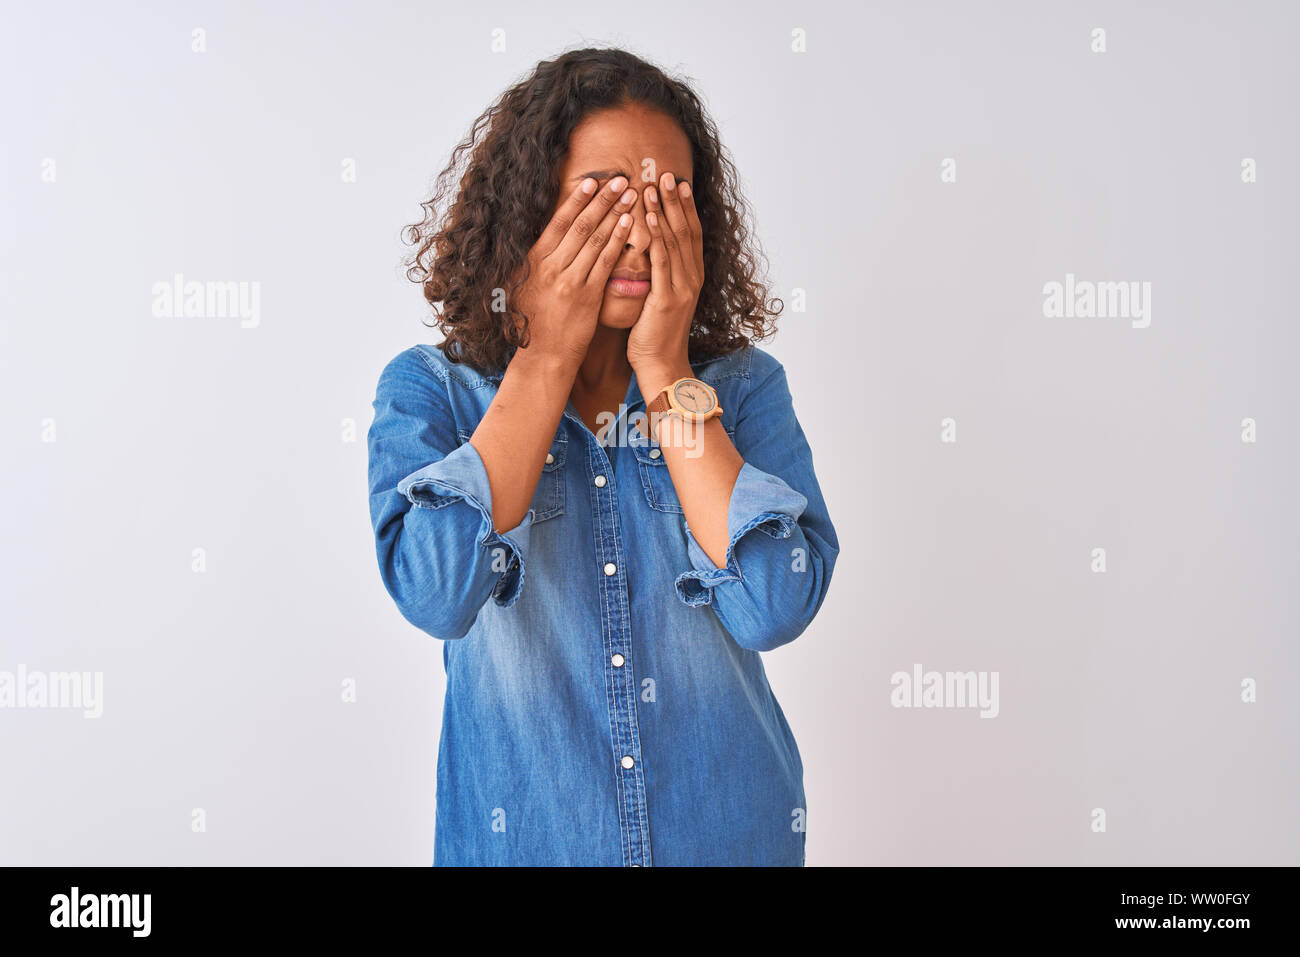 Young brazilian woman wearing denim shirt standing over isolated white background rubbing eyes for fatigue and headache, sleepy and tired expression. Stock Photo